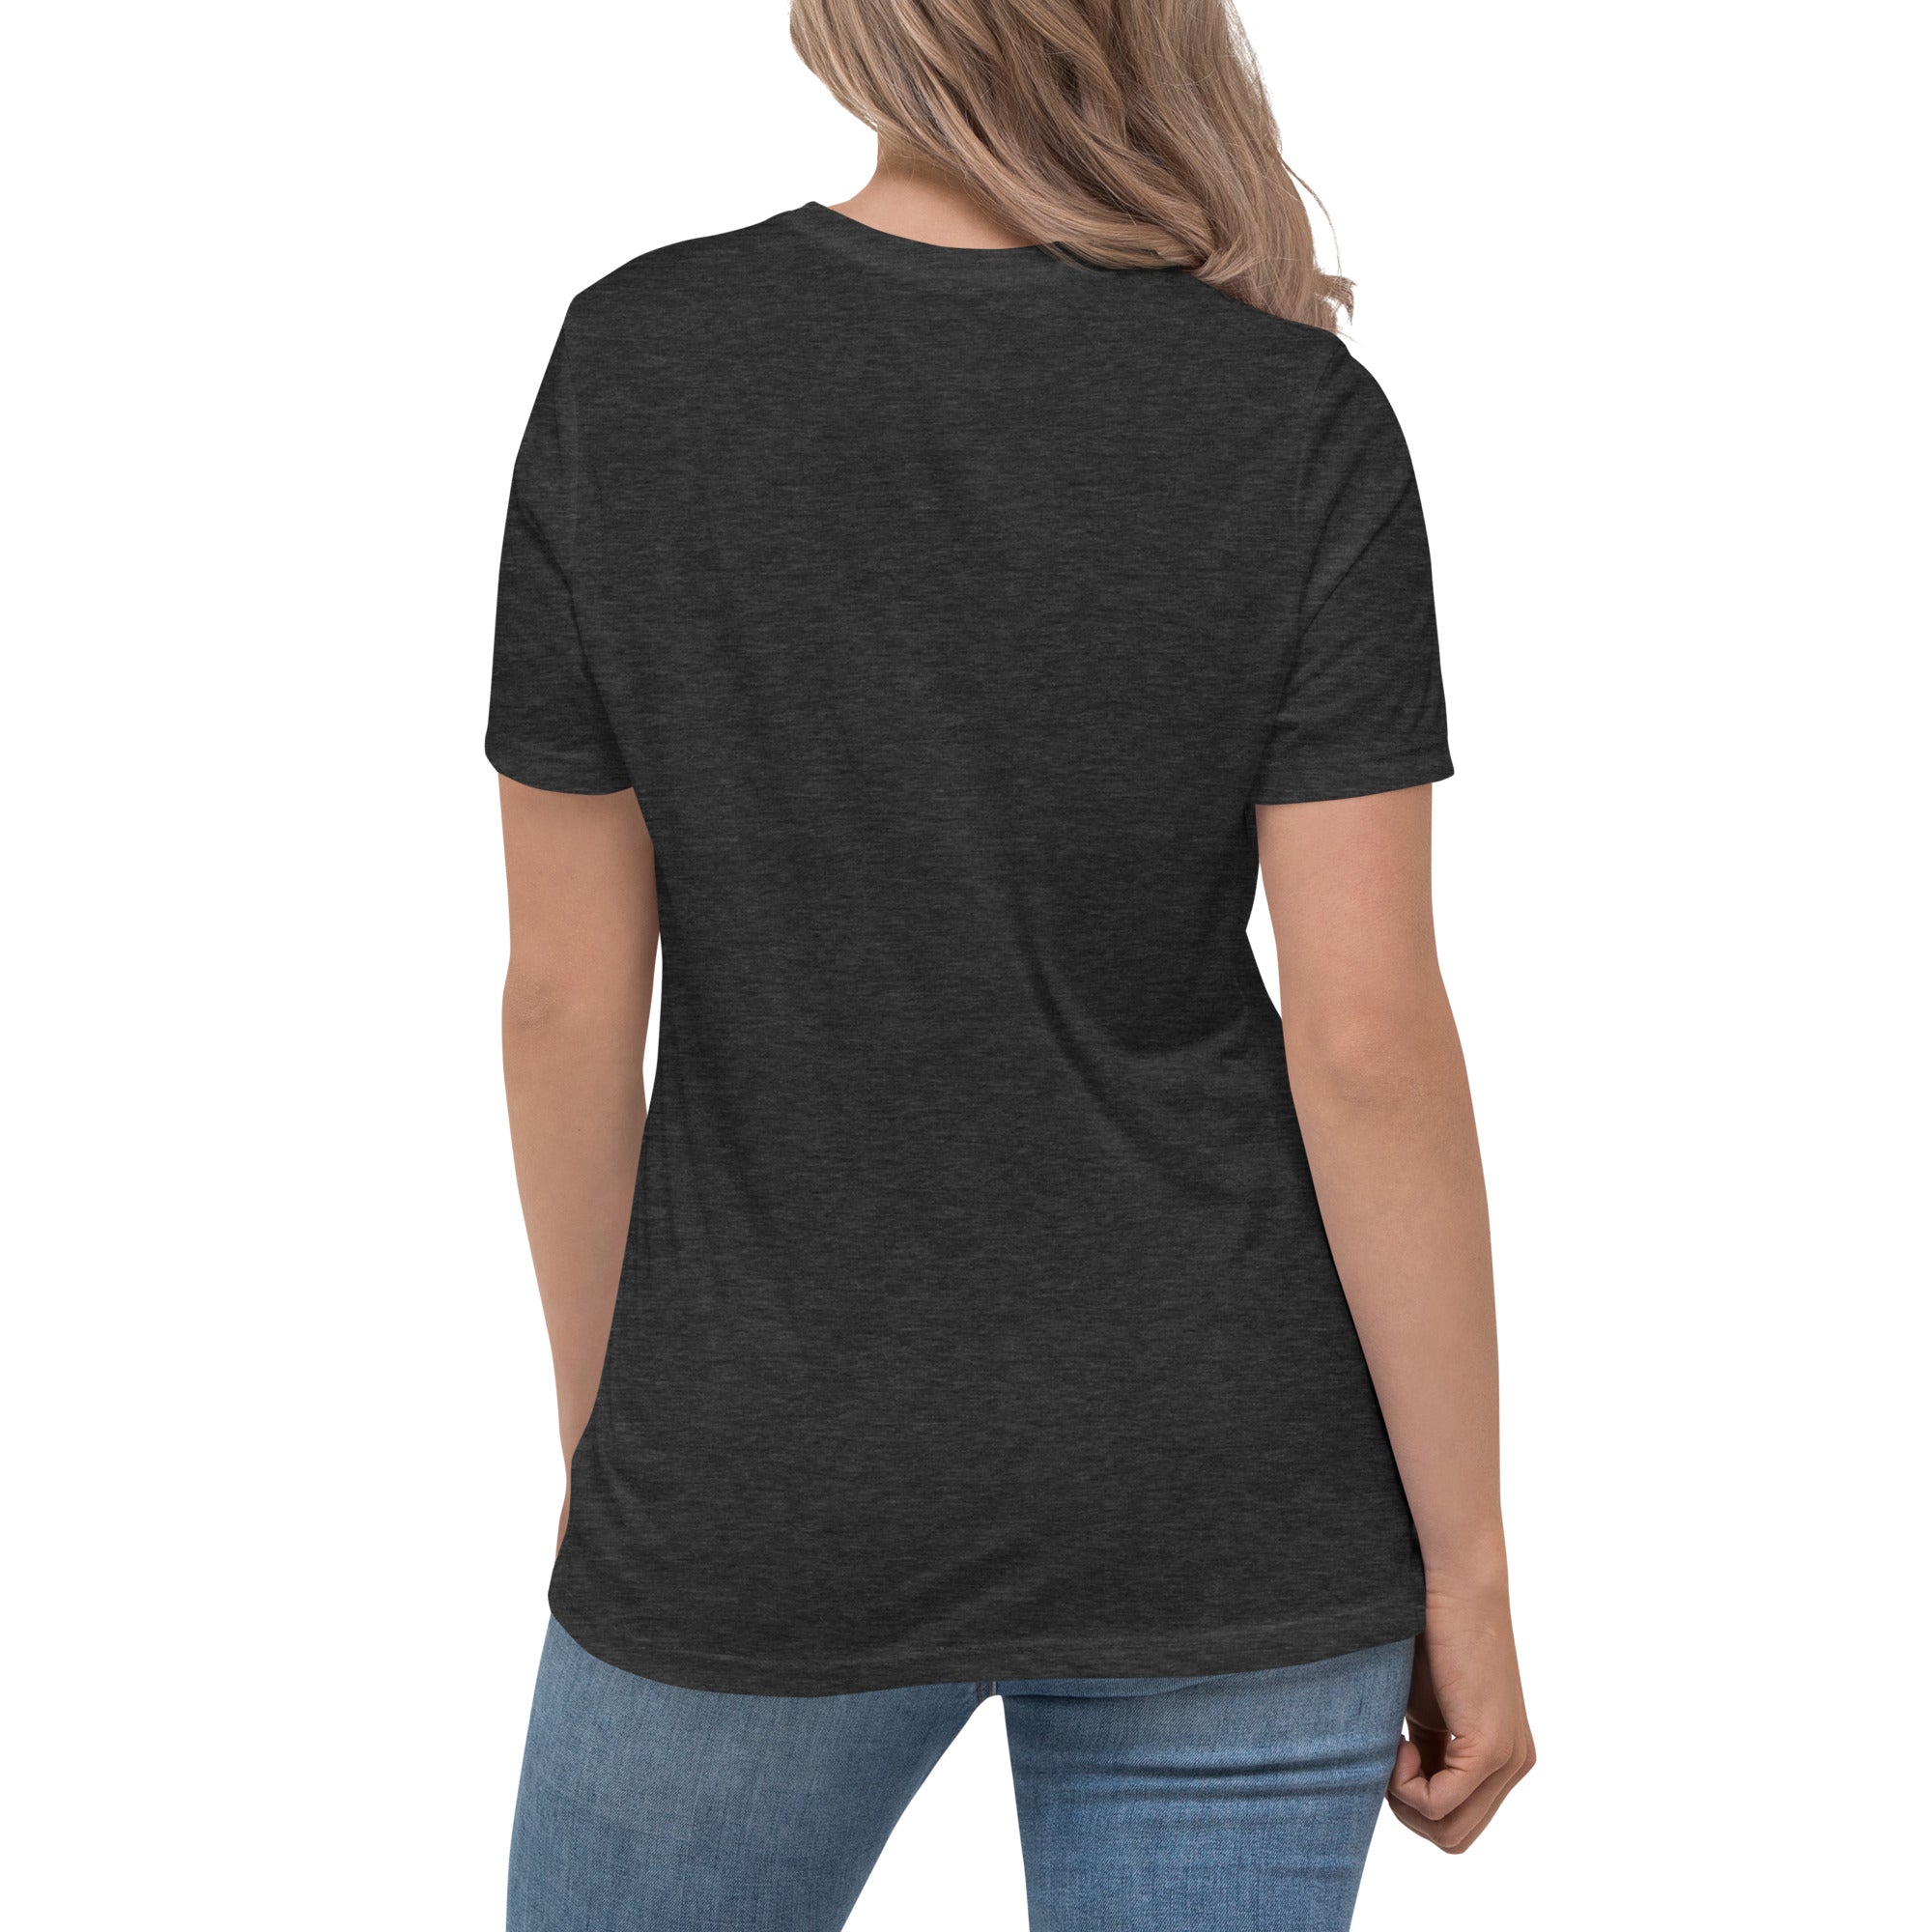 Military Industrial Complex Women's Relaxed T-Shirt